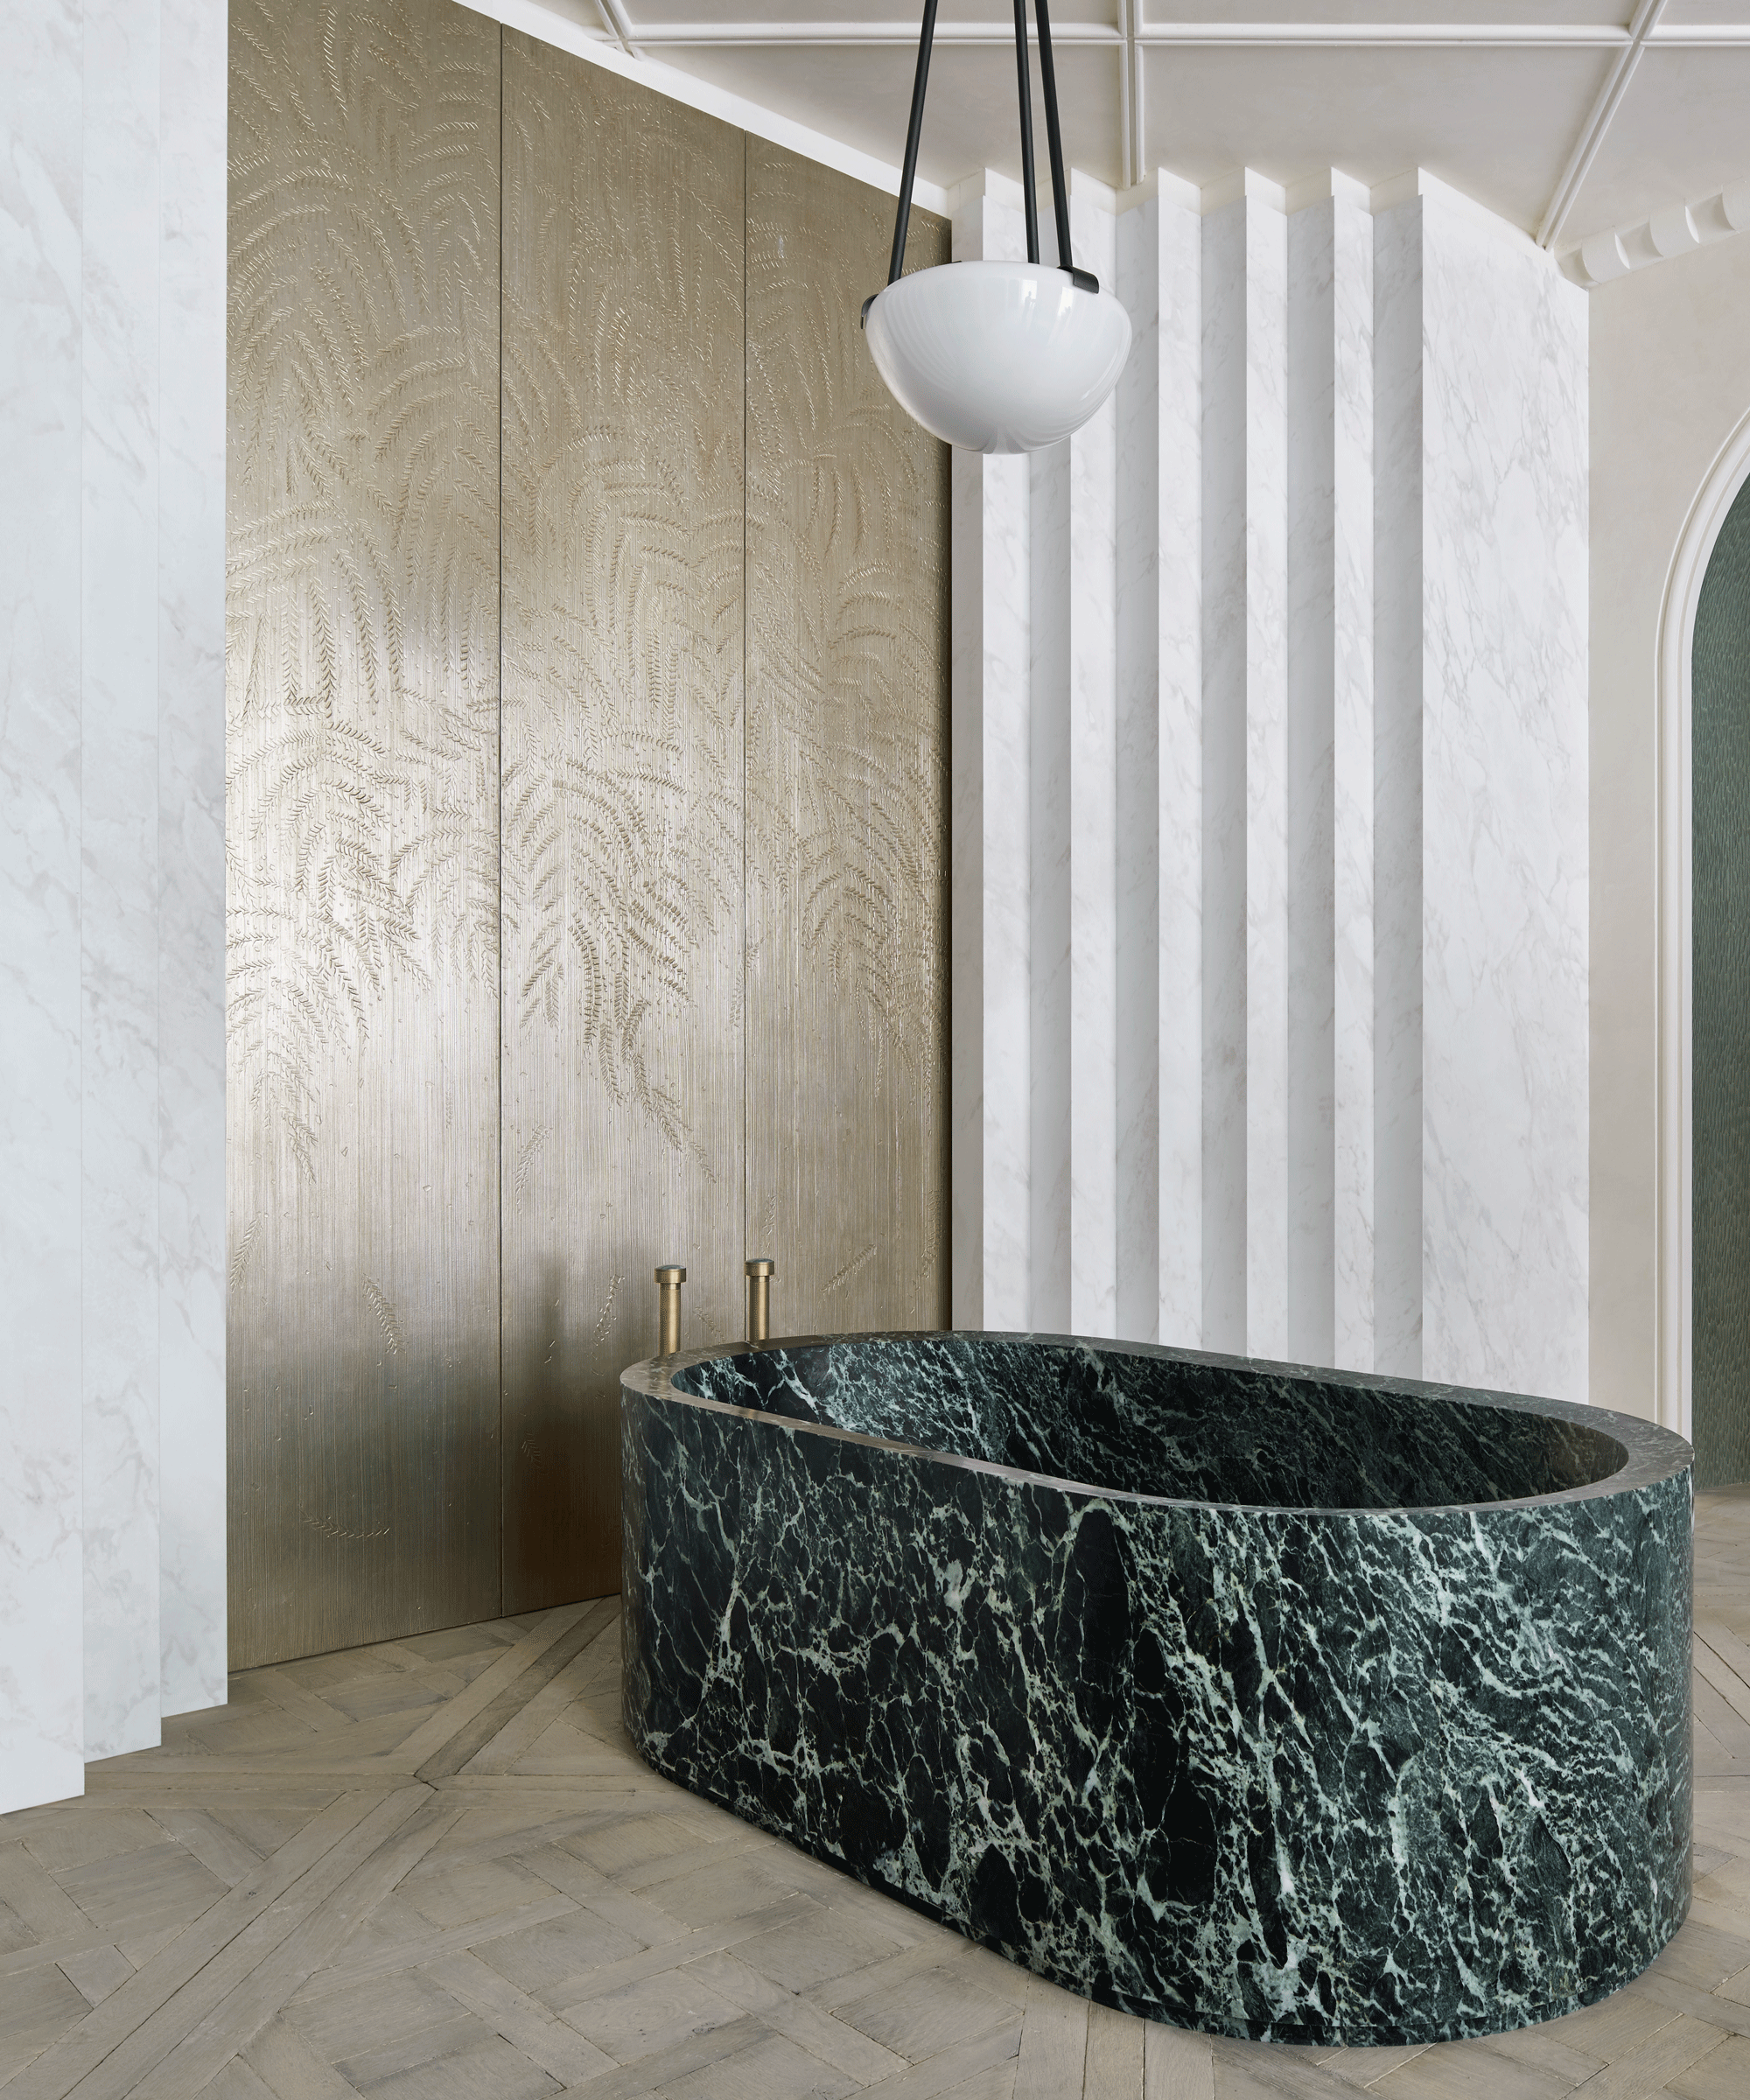 An example of bathroom wall ideas showing a black and green marble bath with a 3D wall